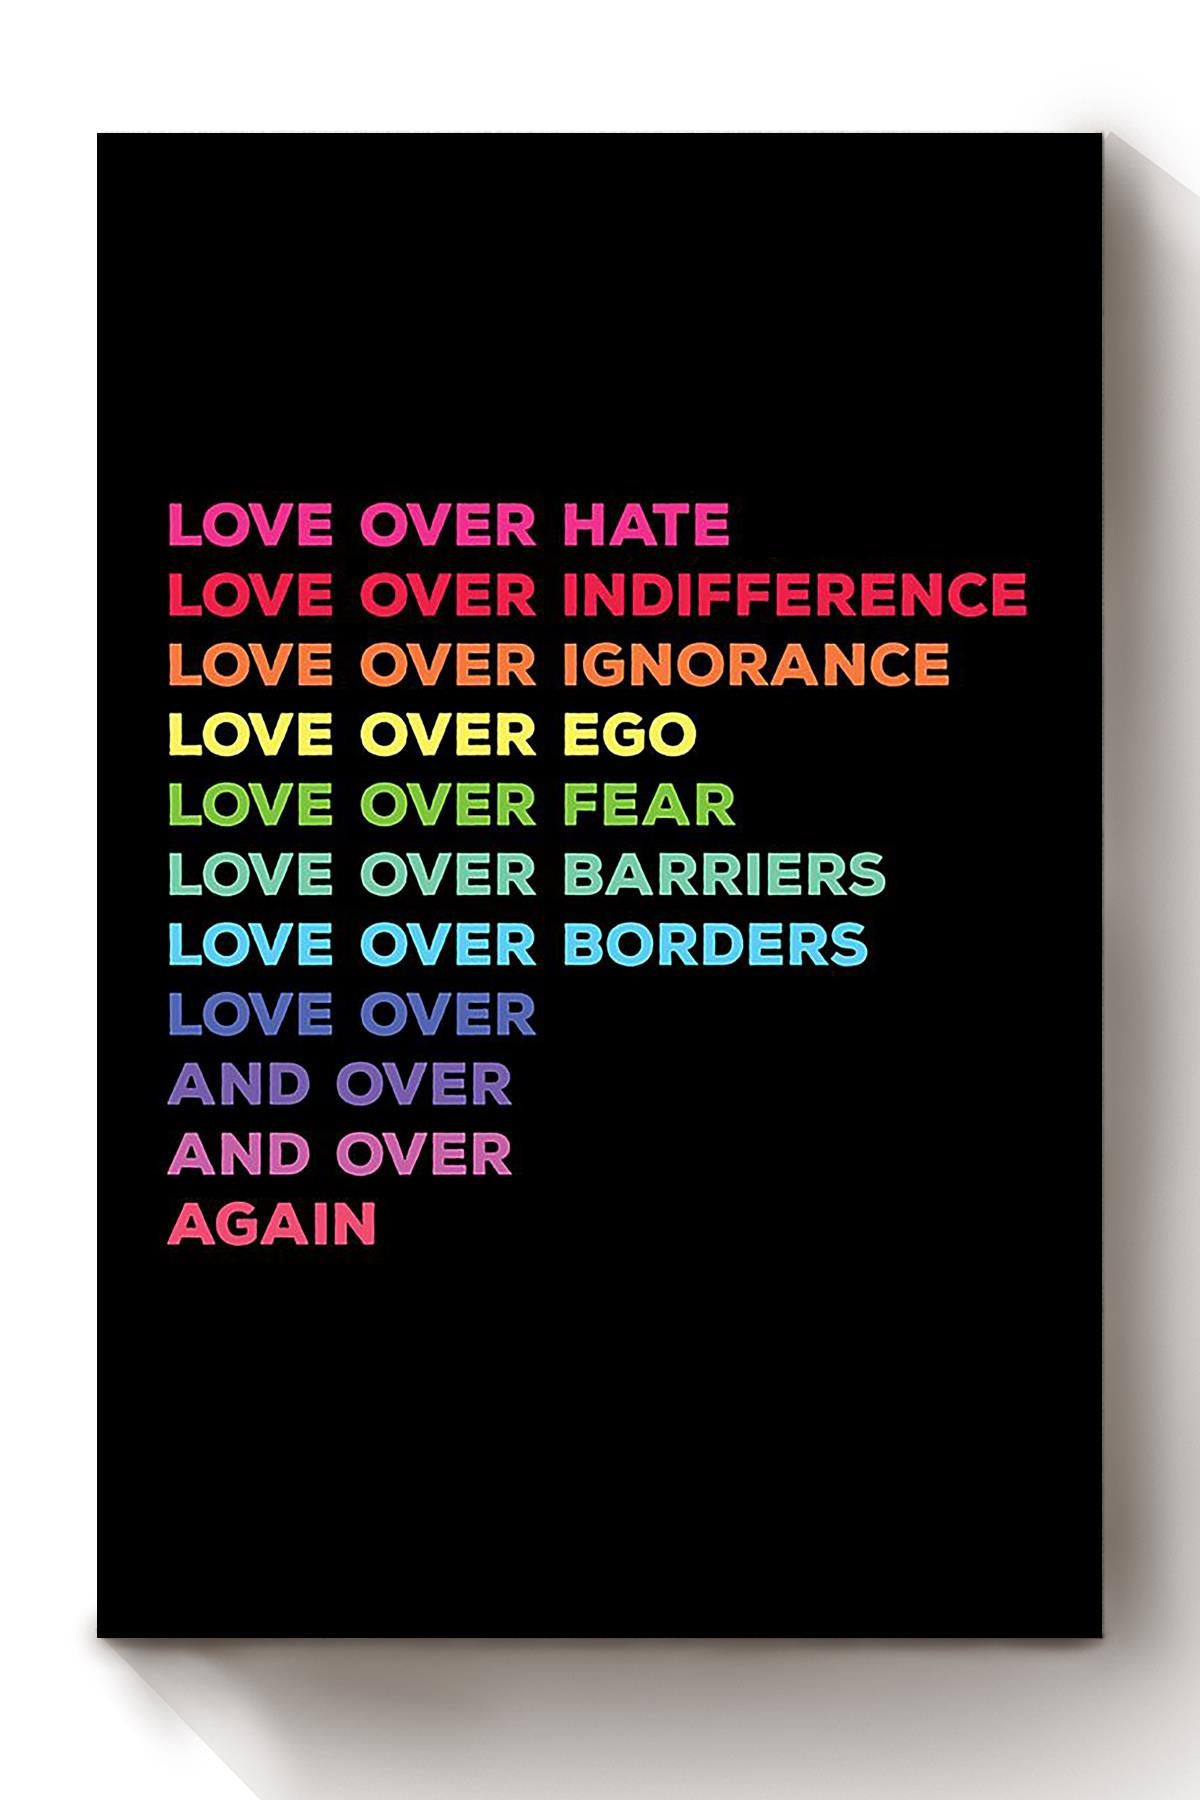 Love Over Everything Just Love Lovespoon Gift For All Gender Orientation Gender Identity Pride Month Canvas Wrapped Canvas 8x10